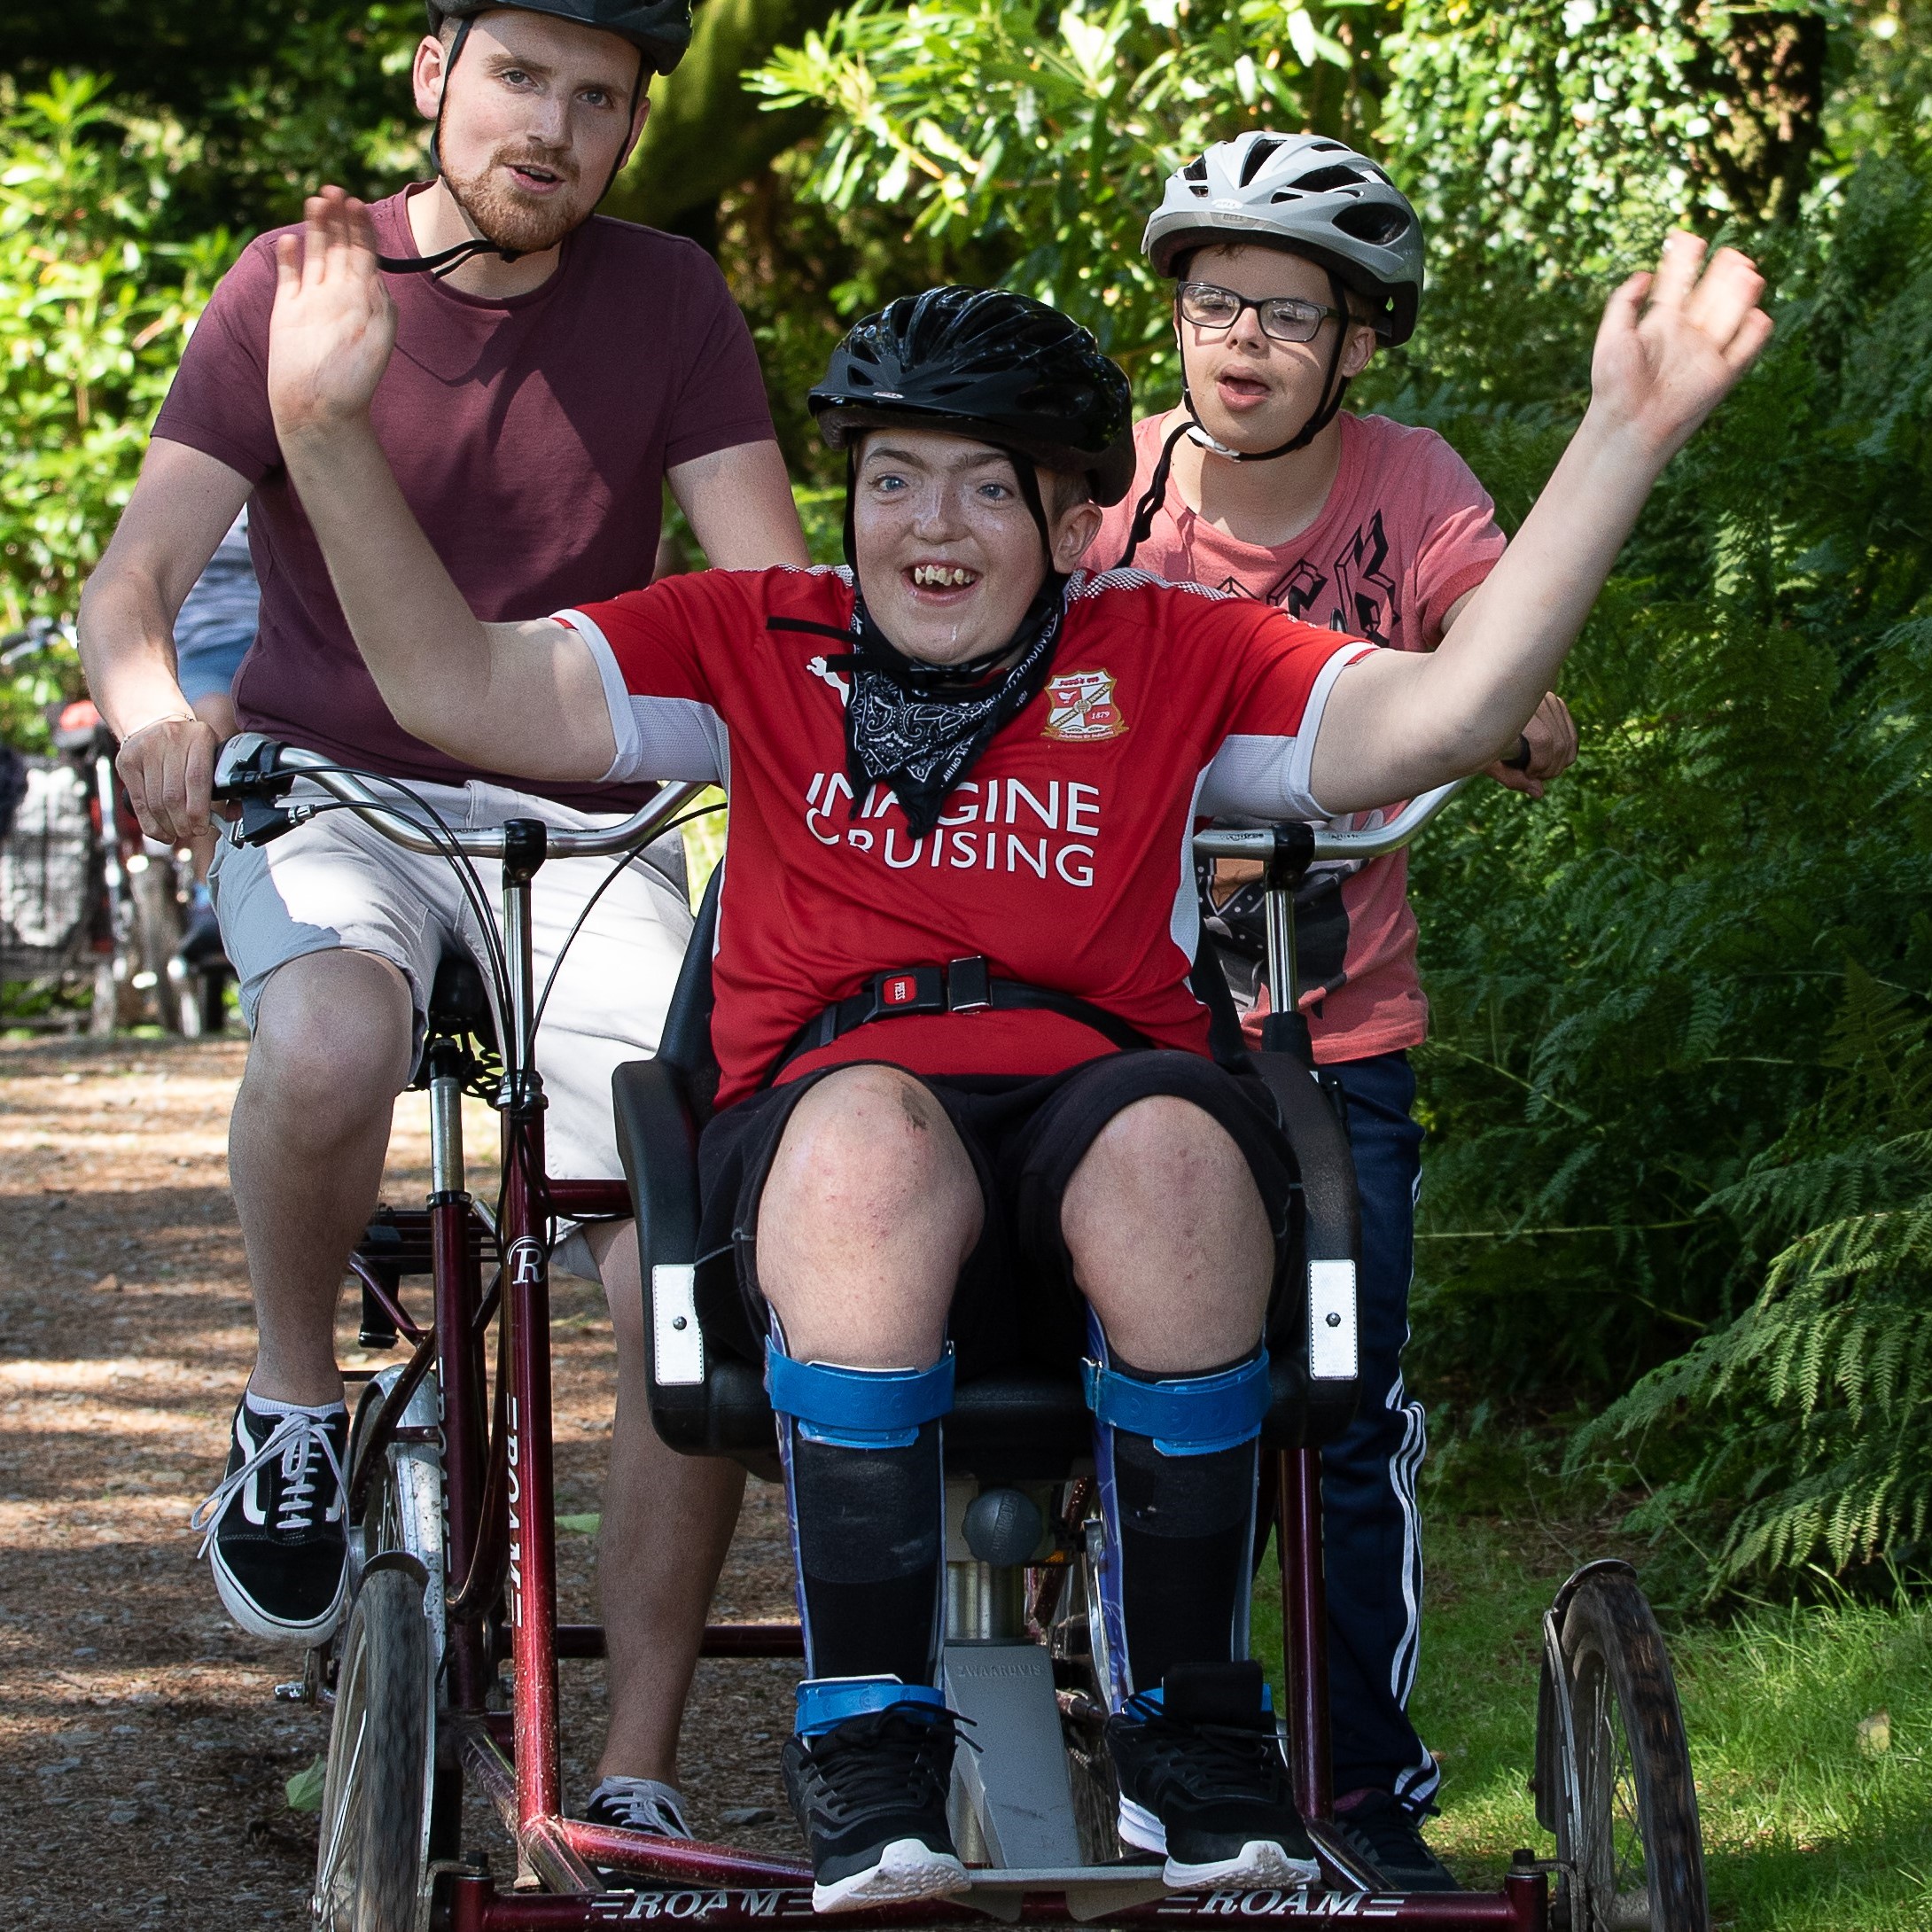 Zoomed in picture of a guest wearing a black helmet and a red t-shirt is sitting on a chair on the front of a four-wheeled bike that has two people sitting and pedaling on behind. They are all looking towards the camera and the guest at the front is smiling with his hands in the air.